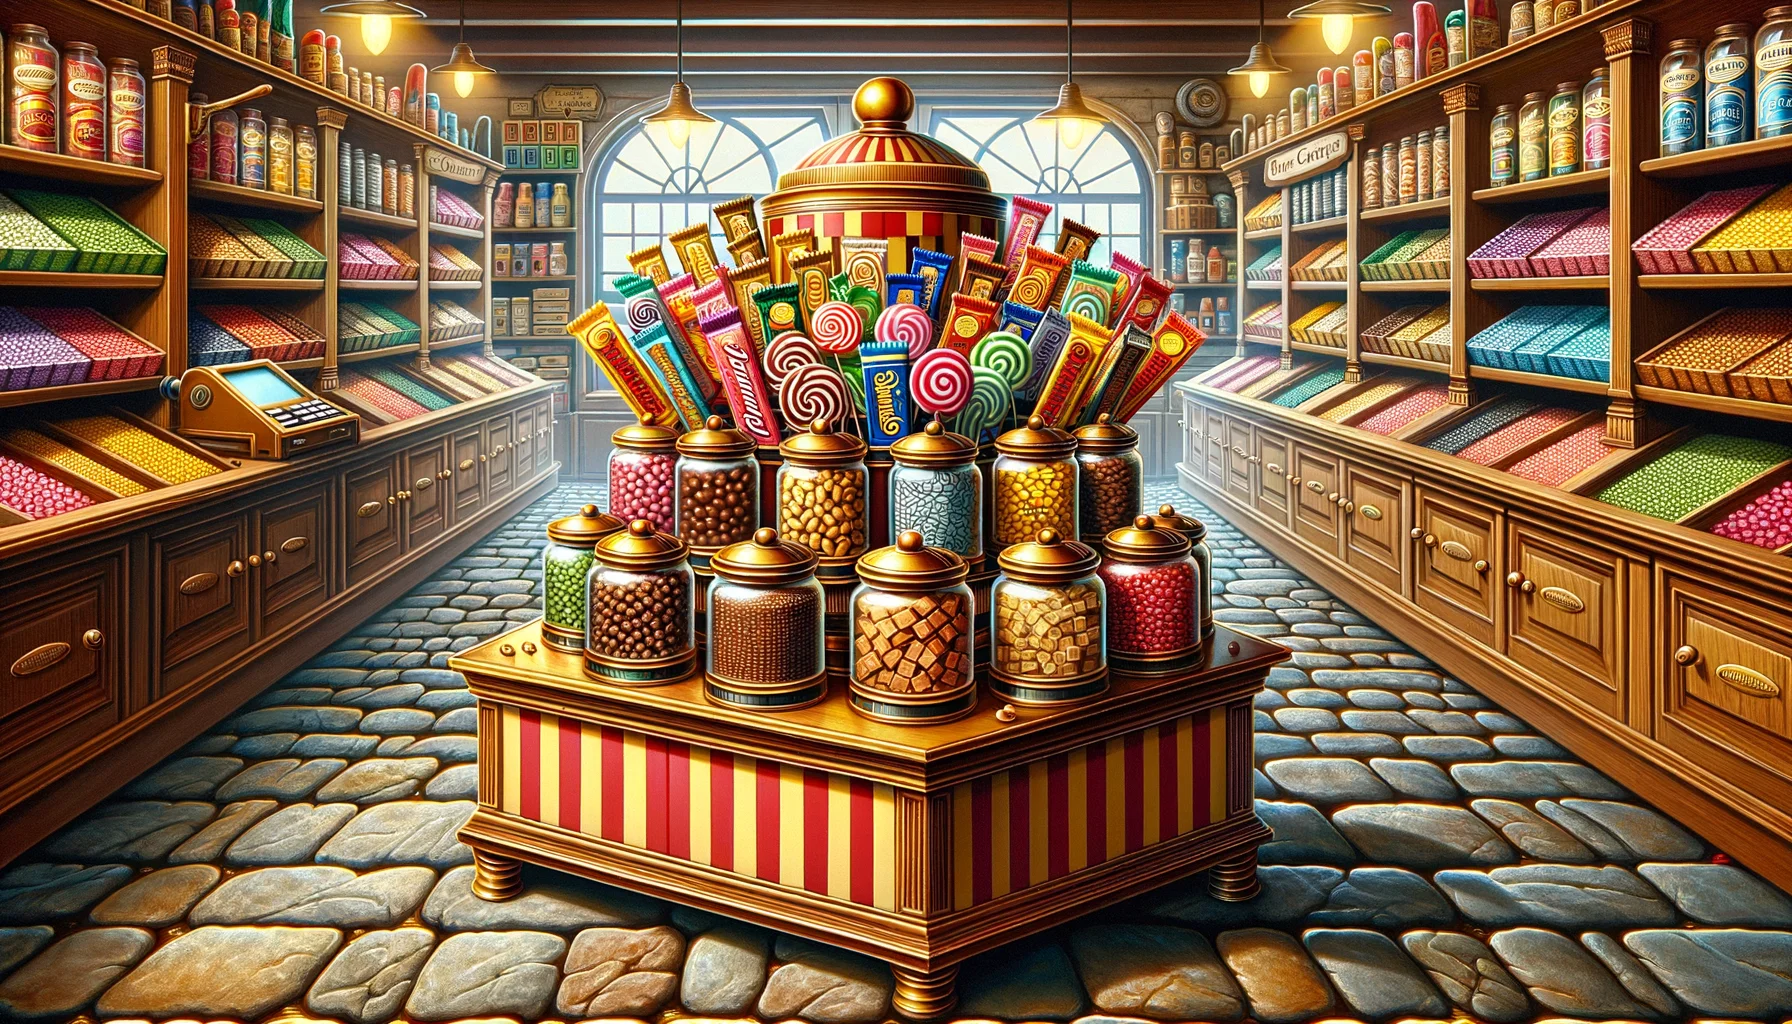 Picture a whimsical yet realistic setting. A candy shop with colourful jars filled with a variety of confectionery lined up on the wooden shelves, old-fashioned till at the counter and cobblestone flooring. The centrepiece of the setting is a bright, striped display stand showcasing assortment of candy bars. Each candy bar is perfectly wrapped in a shiny foil with a distinctive label. The shop is filled with an atmosphere of joy and delight, and you can almost smell the sweet aroma of chocolate, caramel, and nougat filling the air.